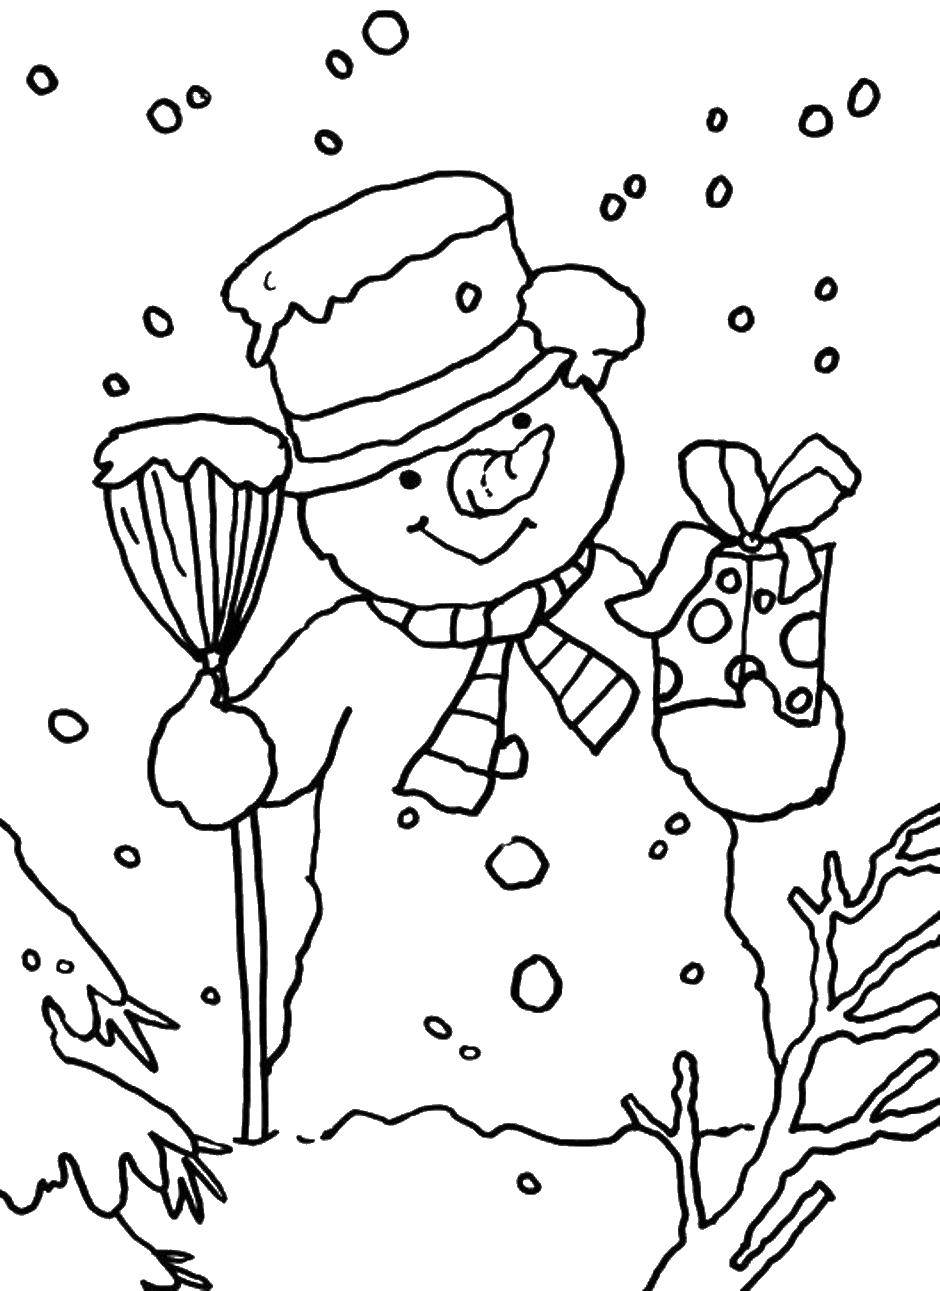 Coloring Snowman. Category snowman. Tags:  snowman, winter.